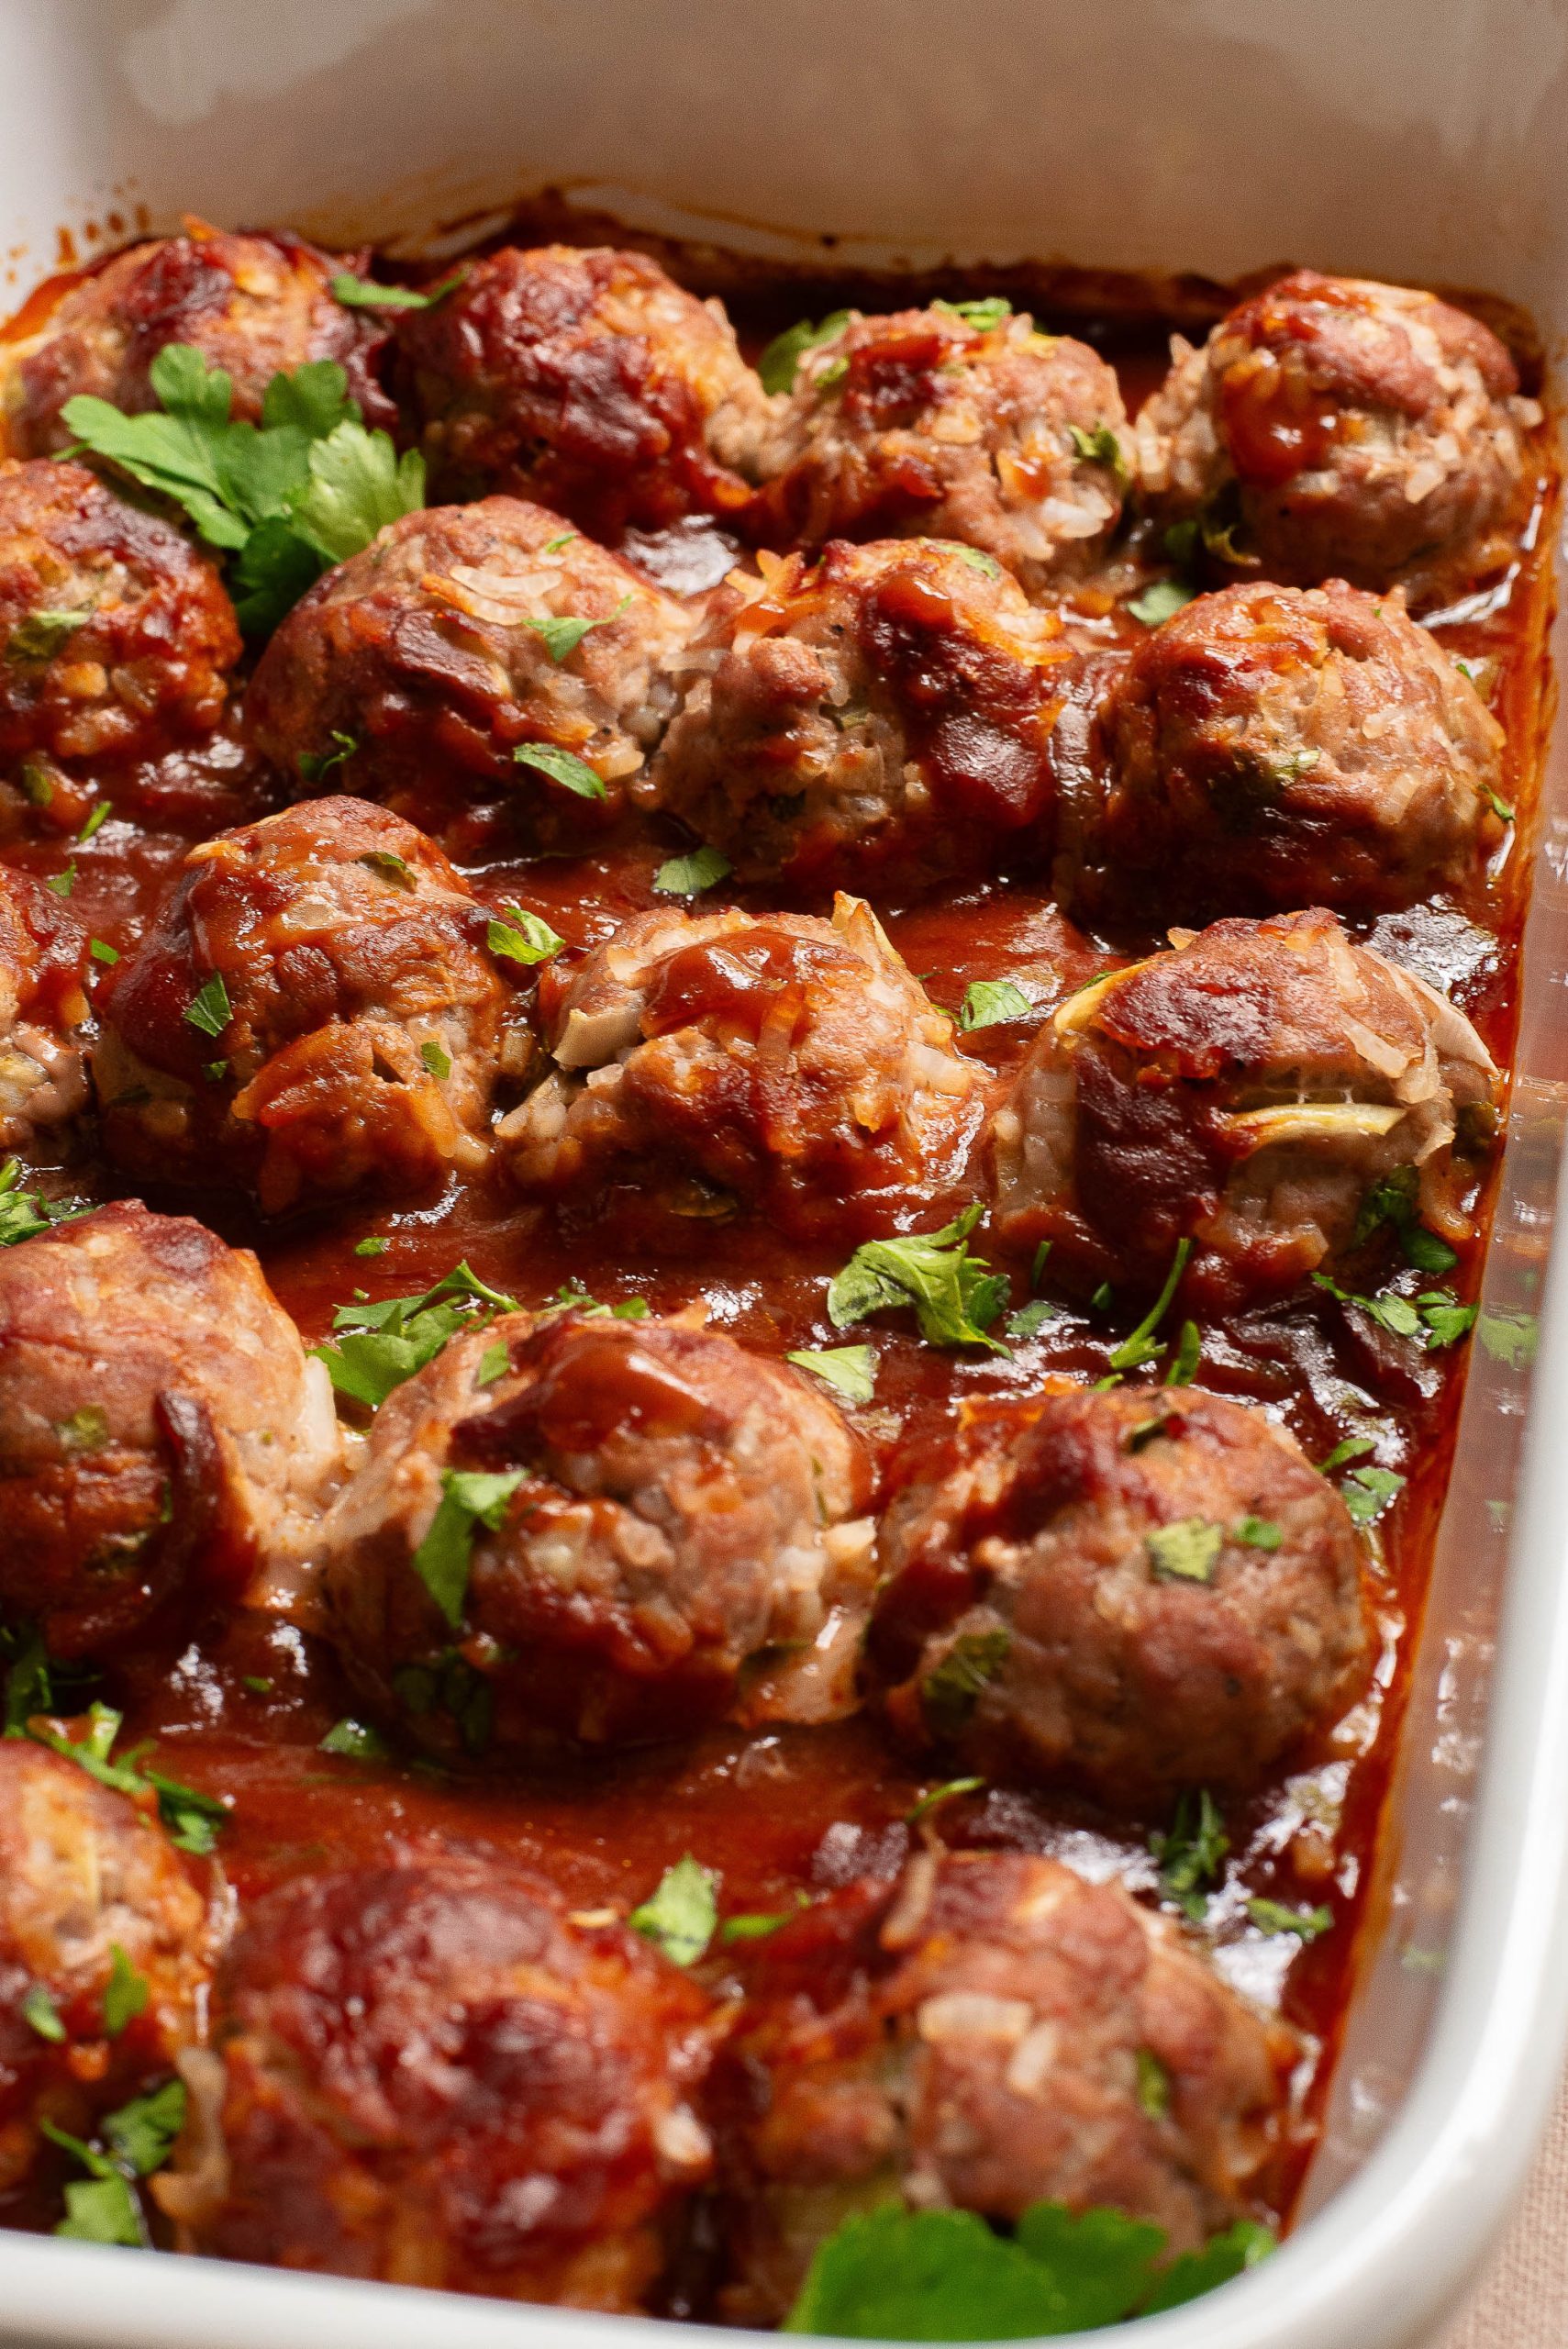 Meatballs in a pan with sauce.